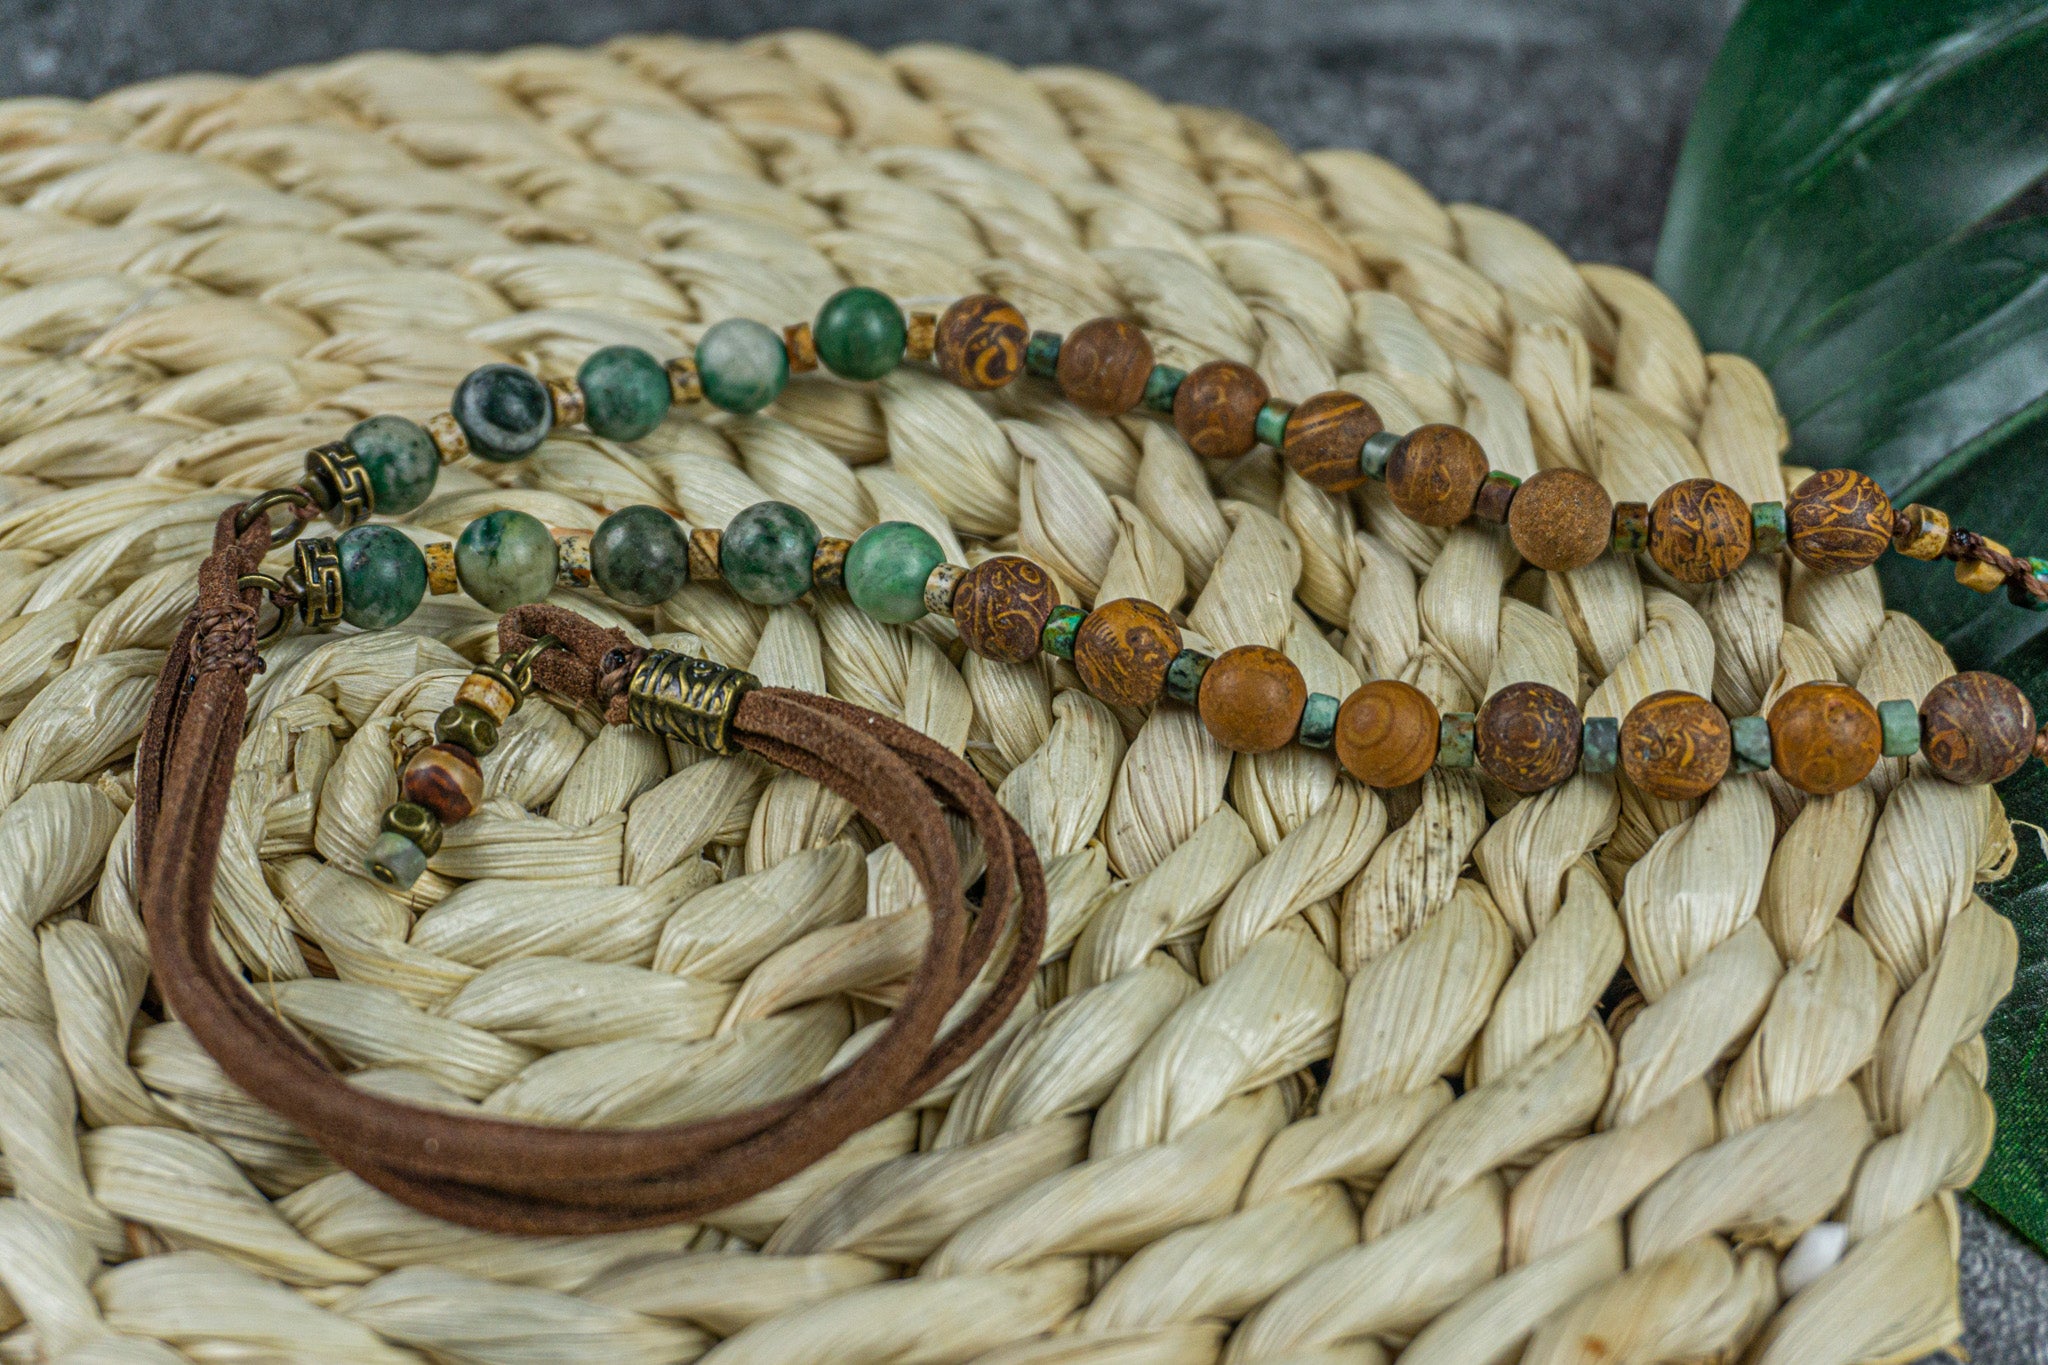 necklace made of leather, jade, jasper and a third eye tibetan agate pendant- wander jewellery